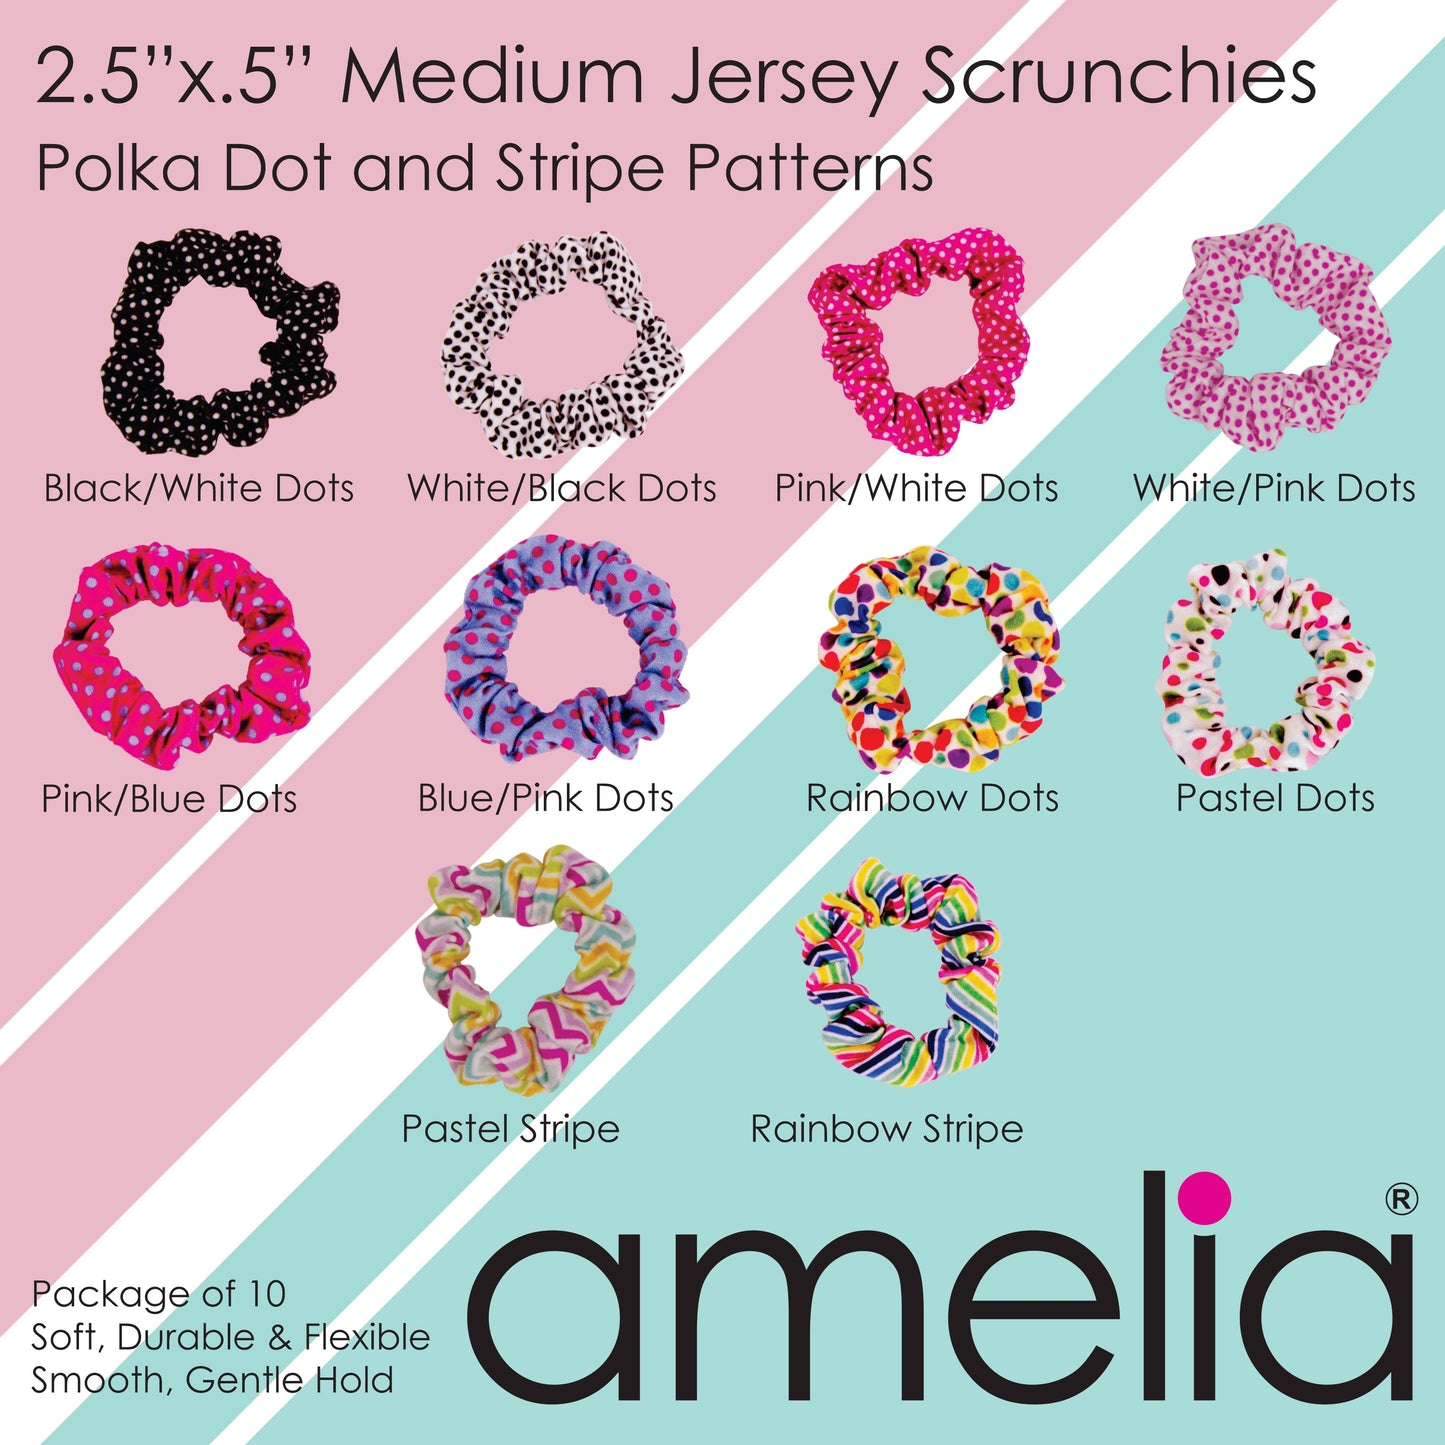 Amelia Beauty, Medium Rainbow Stripe Jersey Scrunchies, 2.5in Diameter, Gentle on Hair, Strong Hold, No Snag, No Dents or Creases. 10 Pack